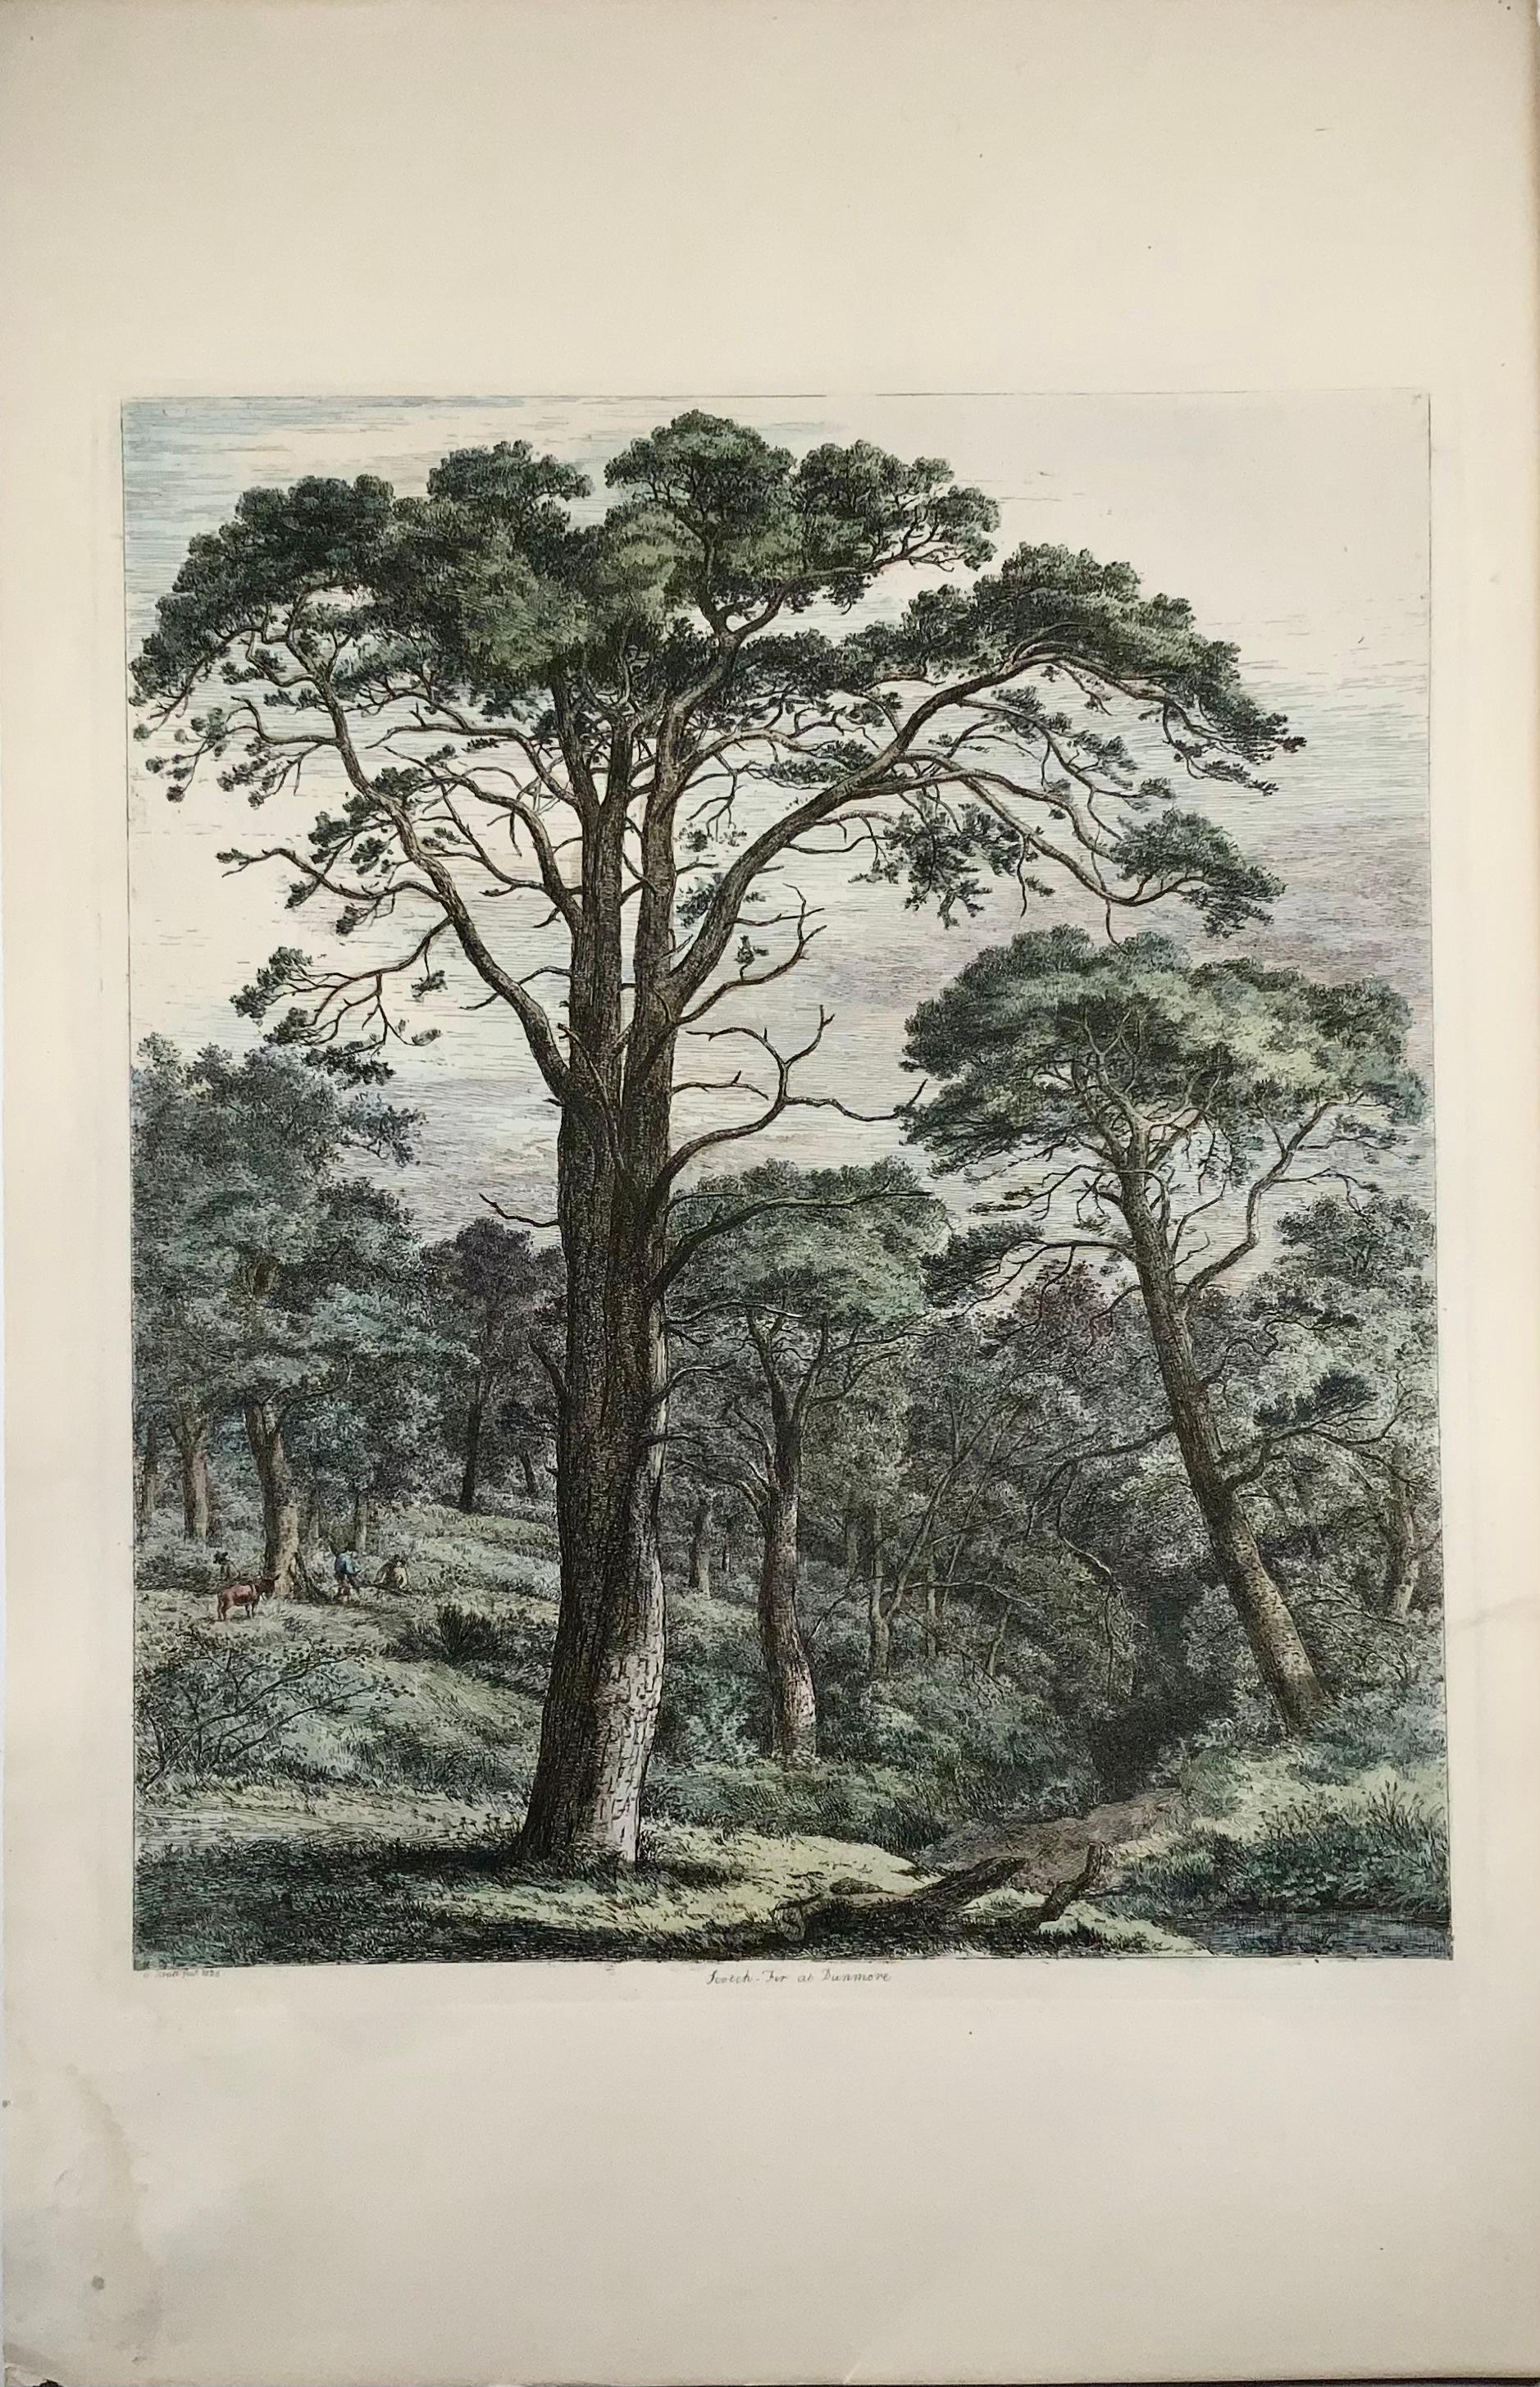 Scotch Fir at Dunmore

Sheet size: 55.4 x 36 cm

Etching with later colour. On wove paper.

Exceptionally etched sheet come from the first edition of Sylva Britannica.

Jacob George Strutt (1784-1867) was a landscape painter and etcher by